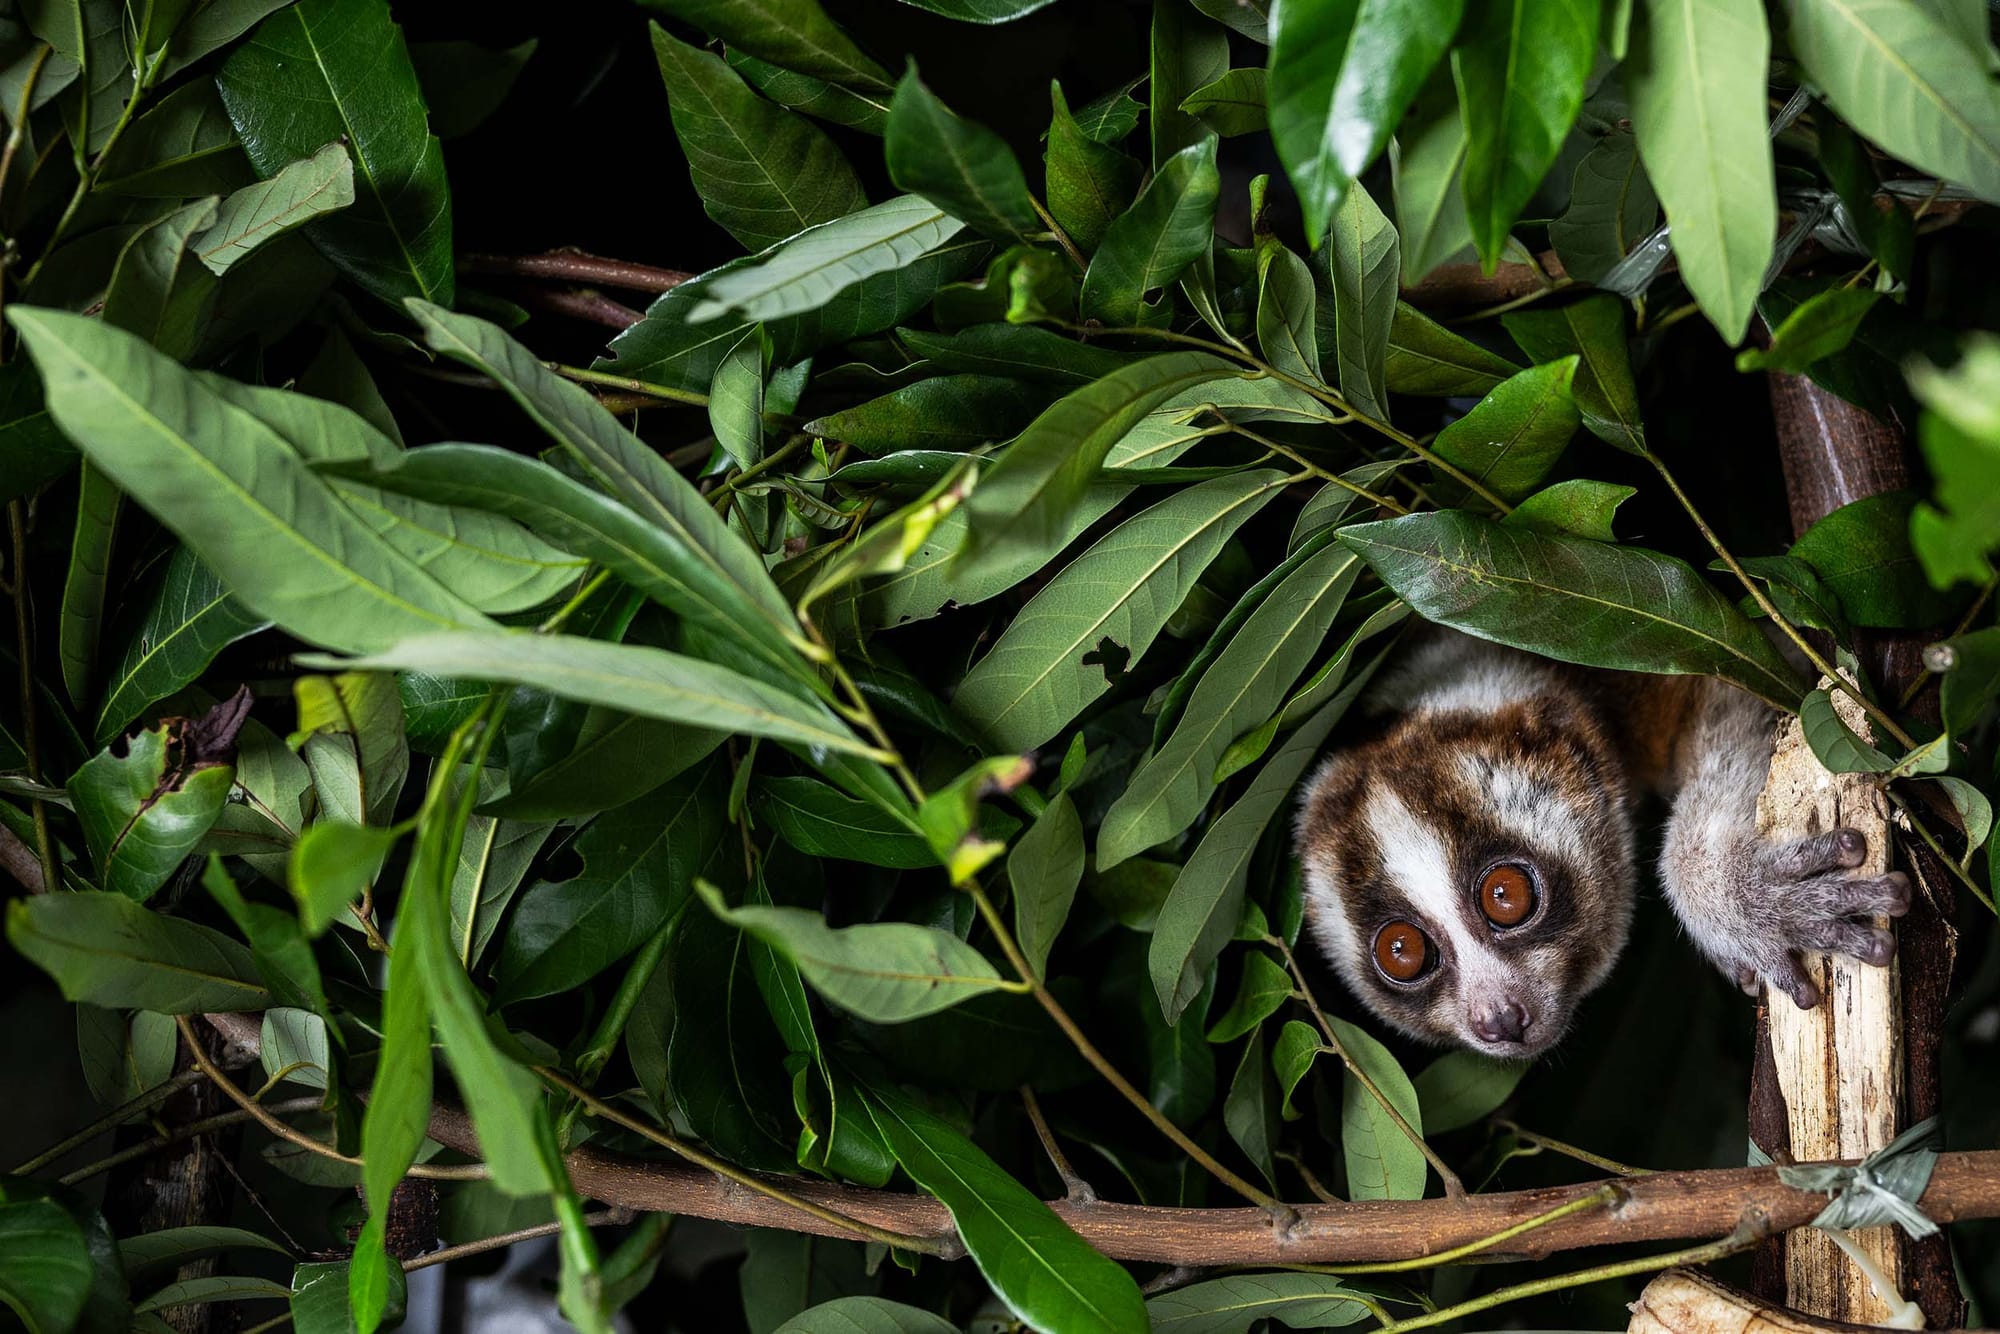 Thick leafy growth with a Javan slow loris poking its head and one arm out at bottom right